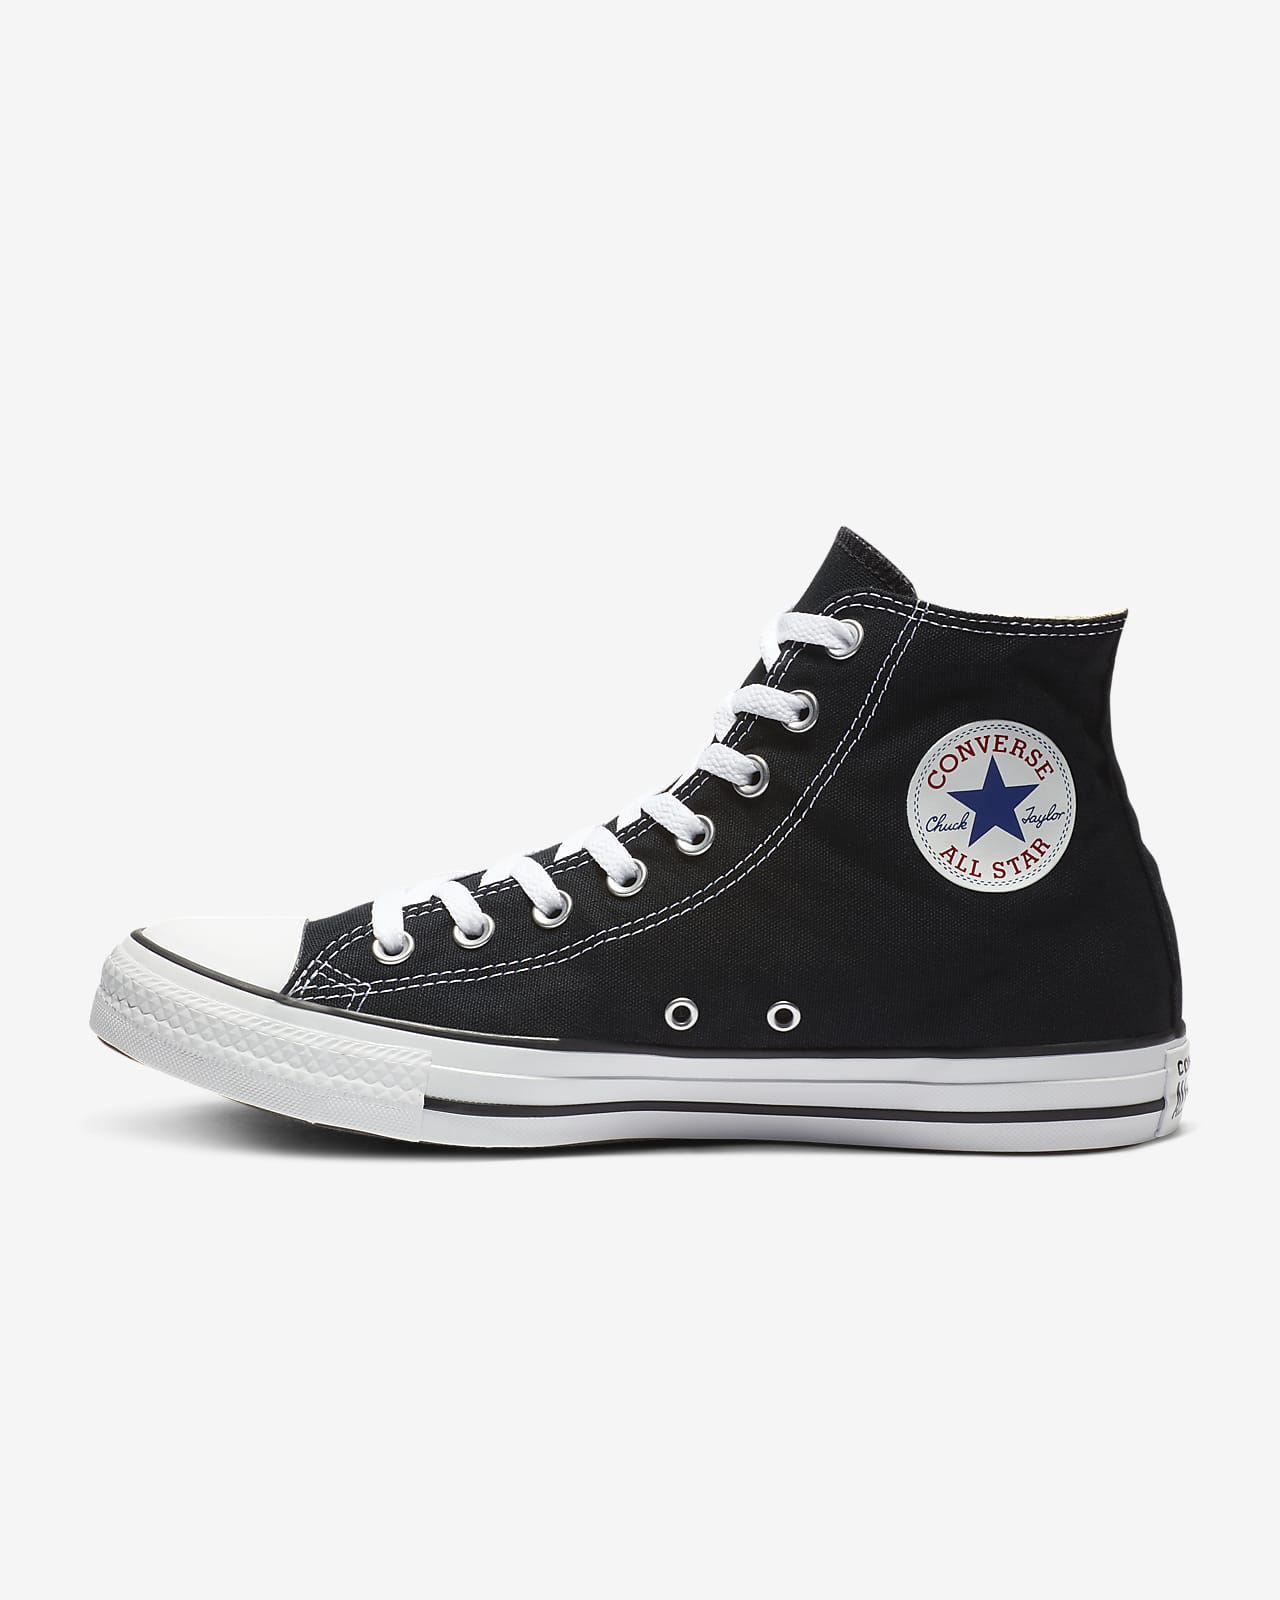 Converse Chuck Taylor All Star High Top Unisex Shoes. 